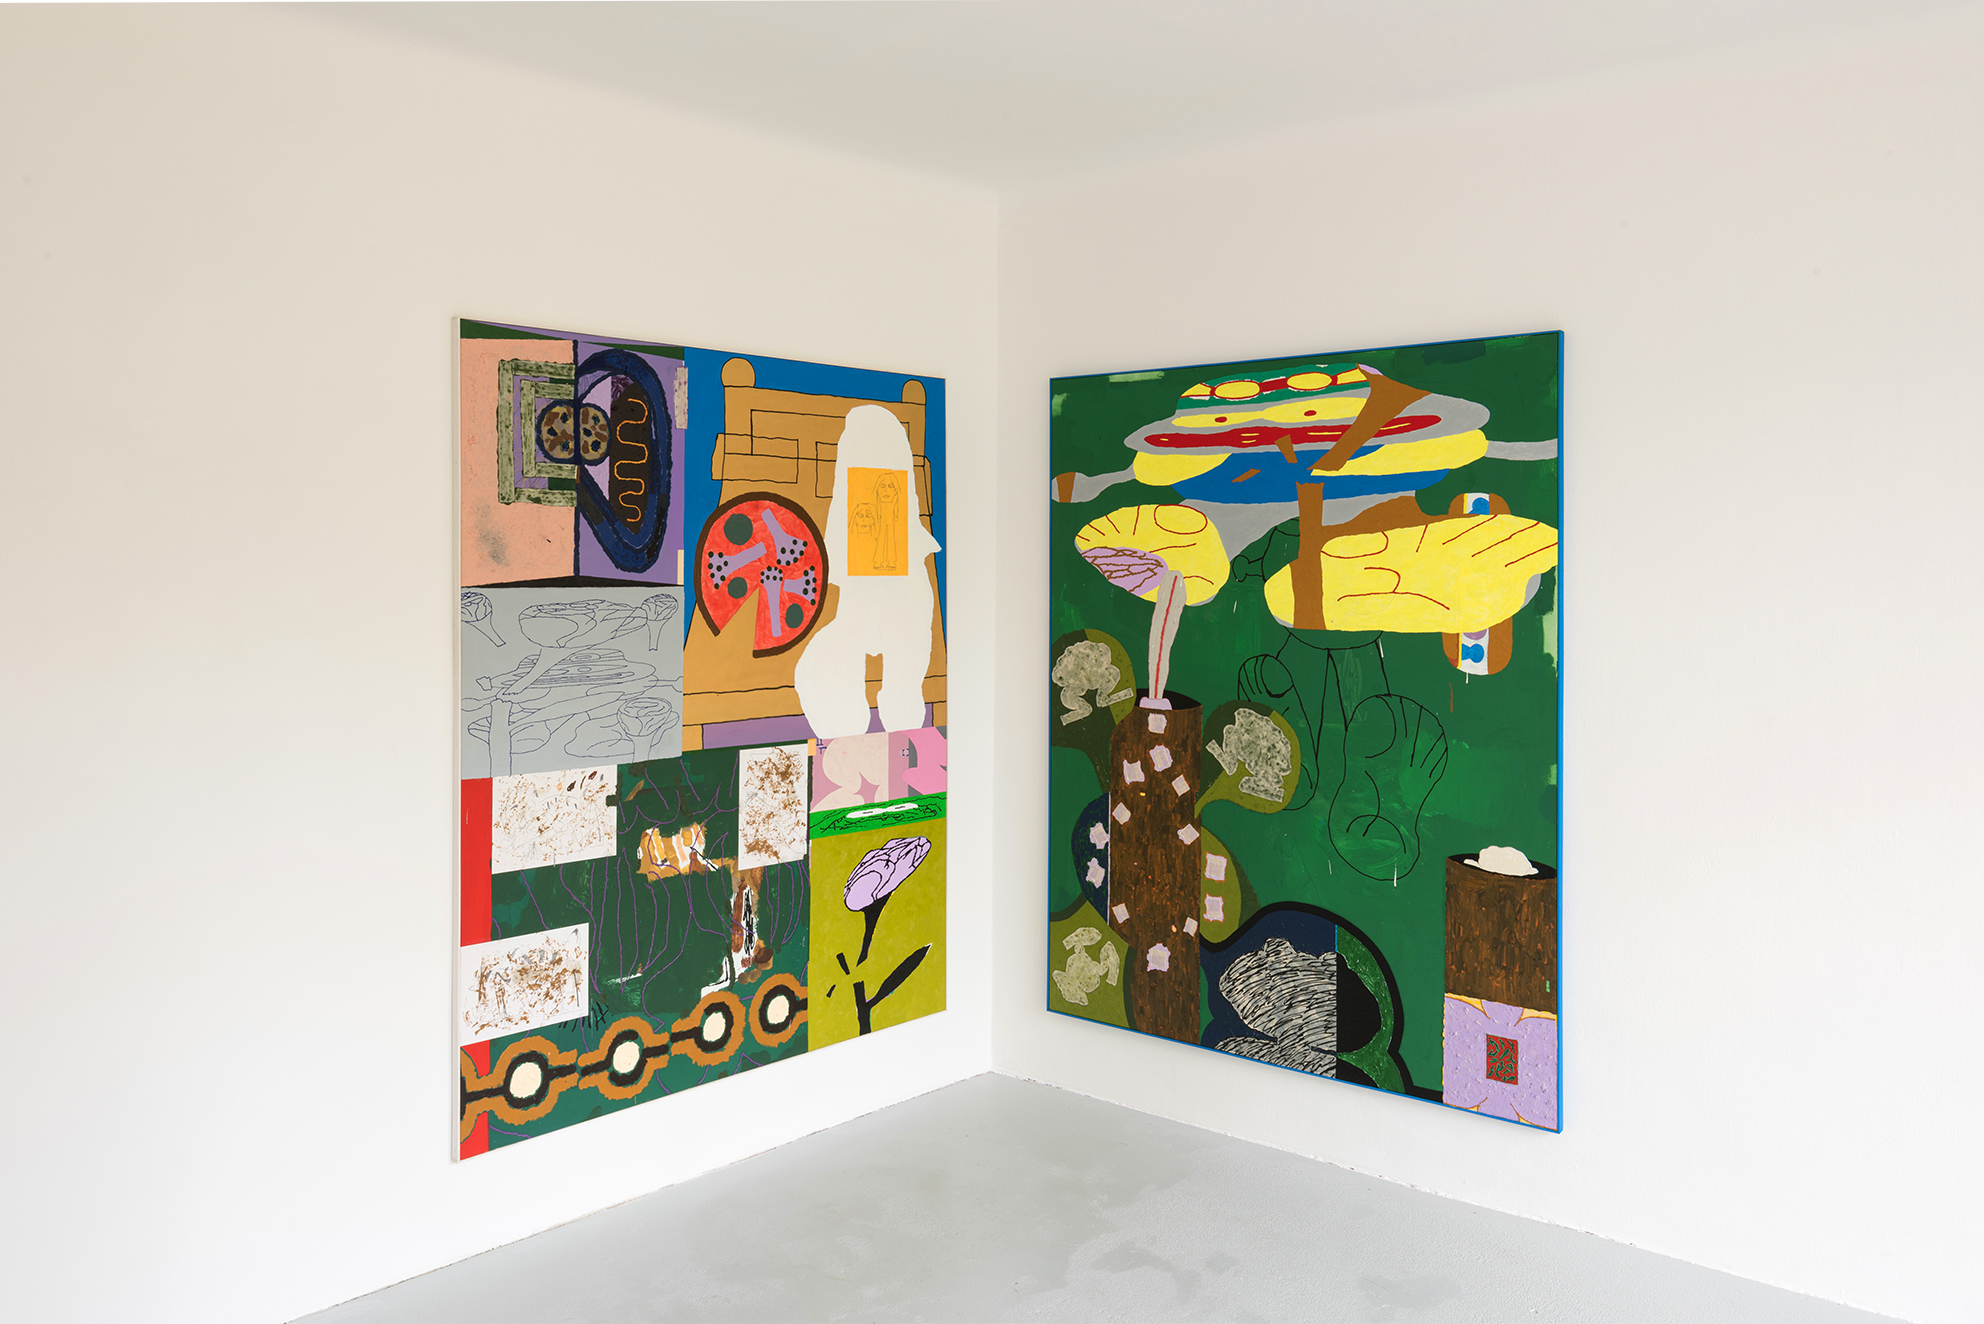 Max Freund and Paul Waak / Exhibition view